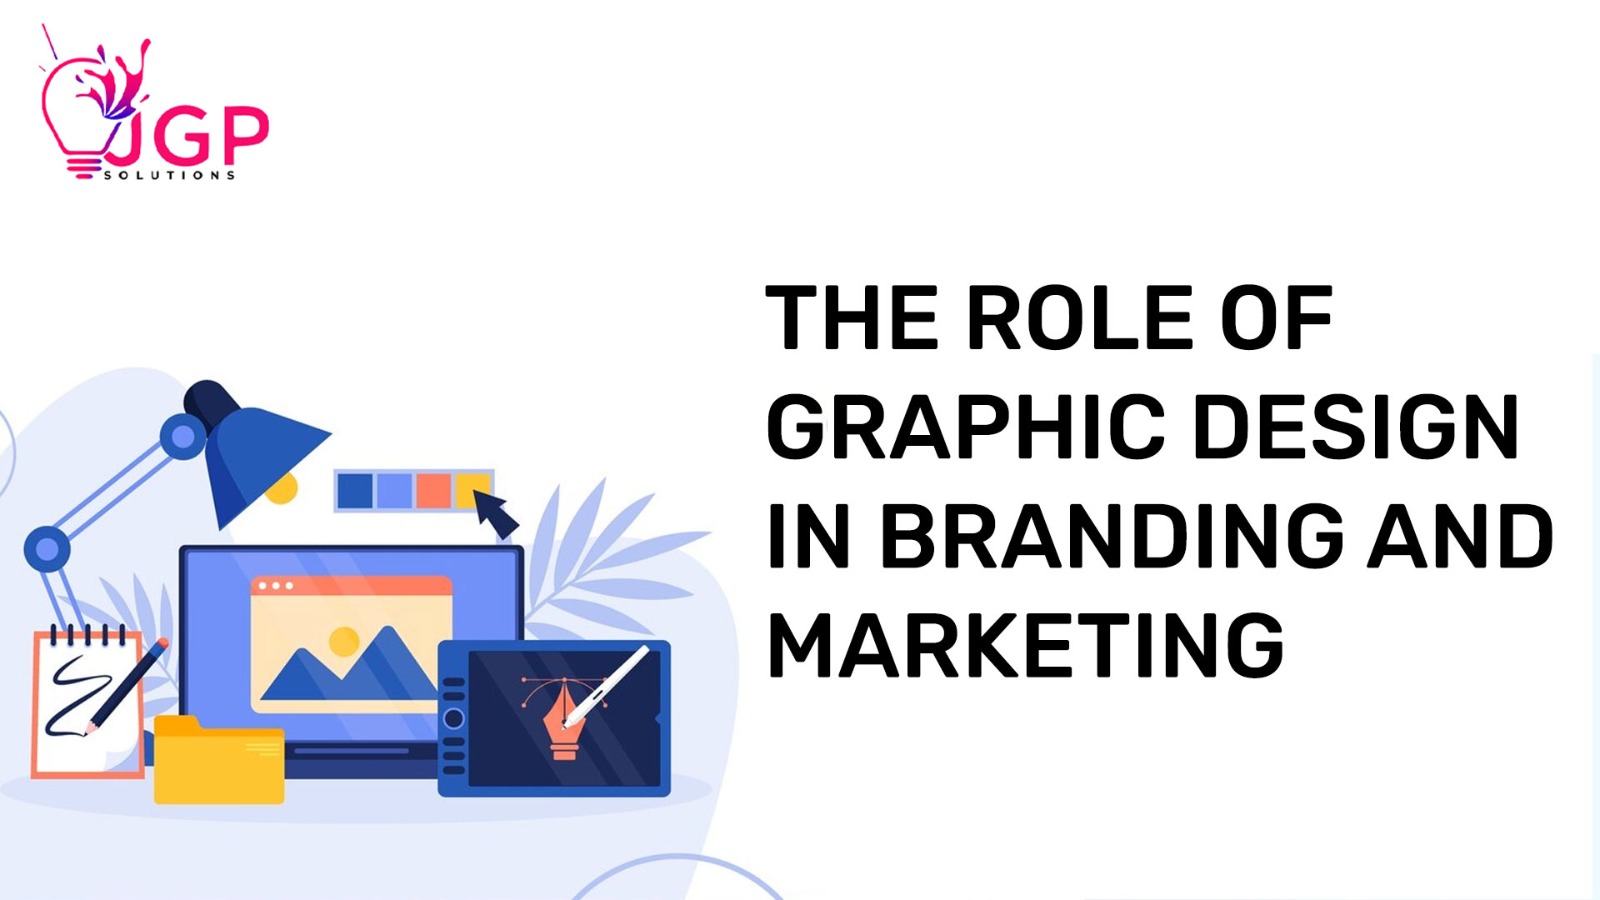 The Role of Graphic Design in Branding and Marketing